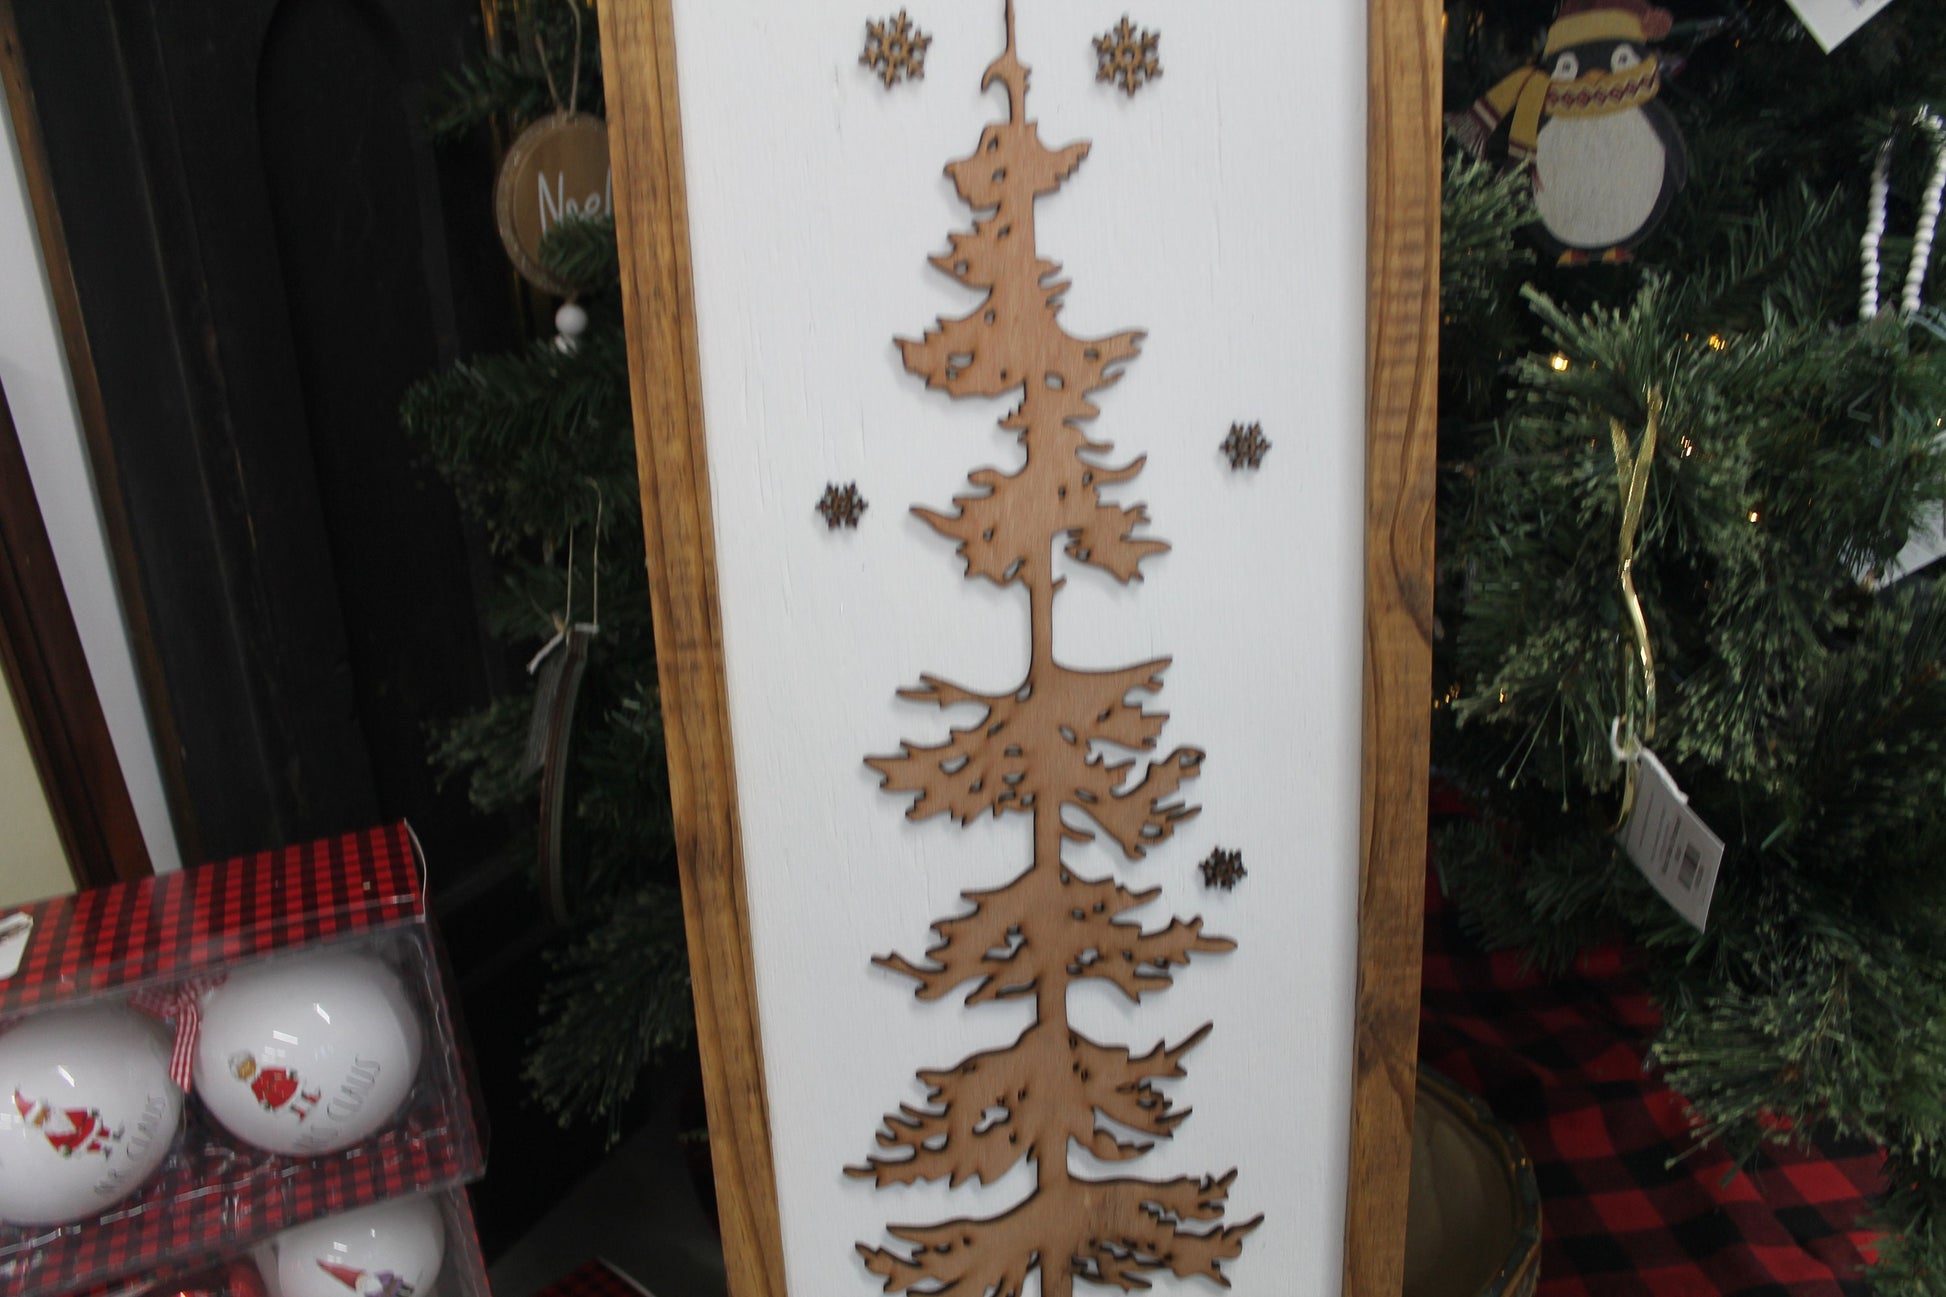 Winter Snowflake Decorations, White Standing Wooden Snowflakes